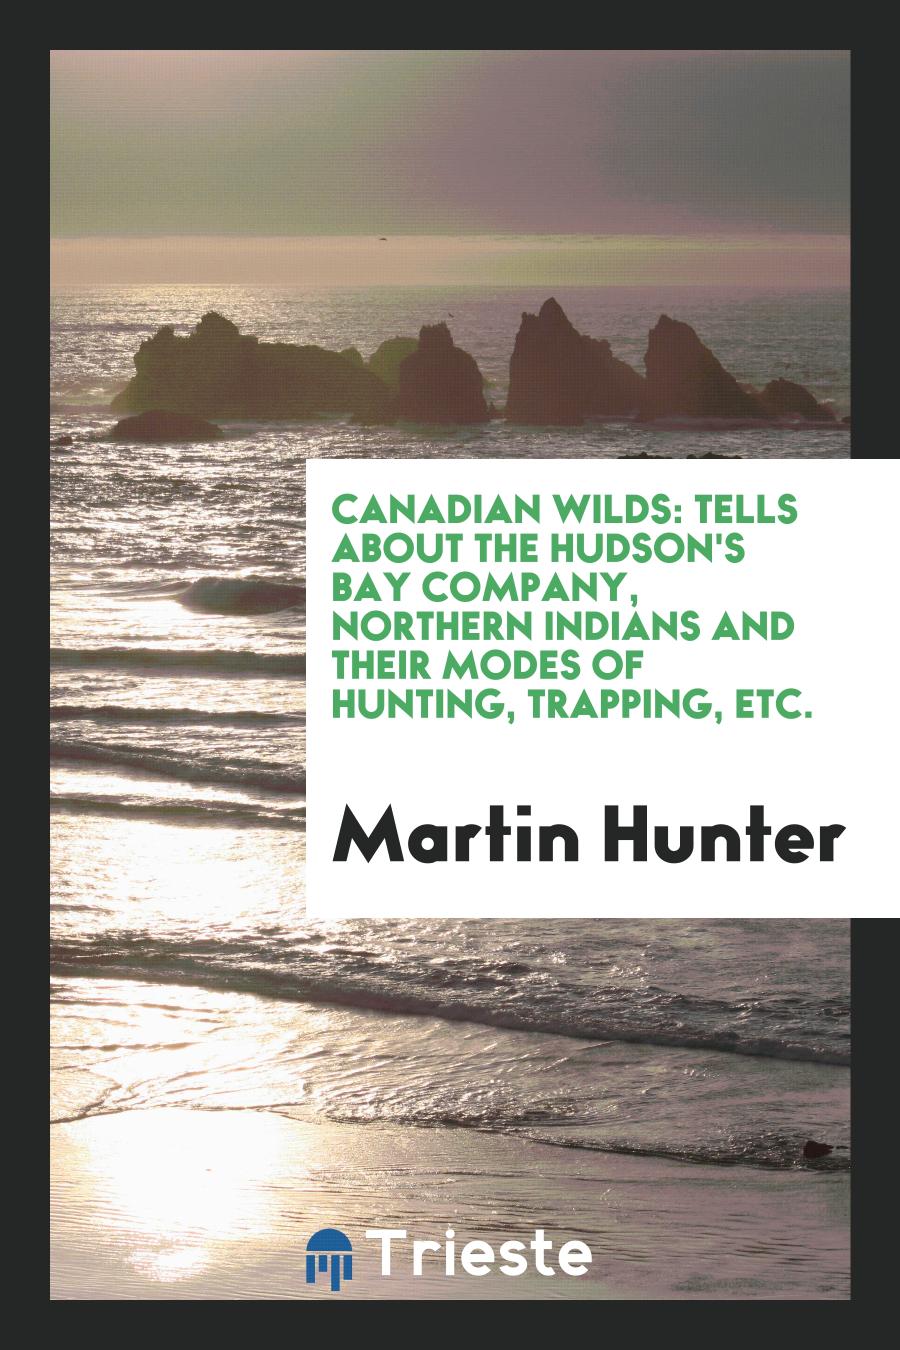 Canadian Wilds: Tells About the Hudson's Bay Company, Northern Indians and Their Modes of Hunting, Trapping, Etc.